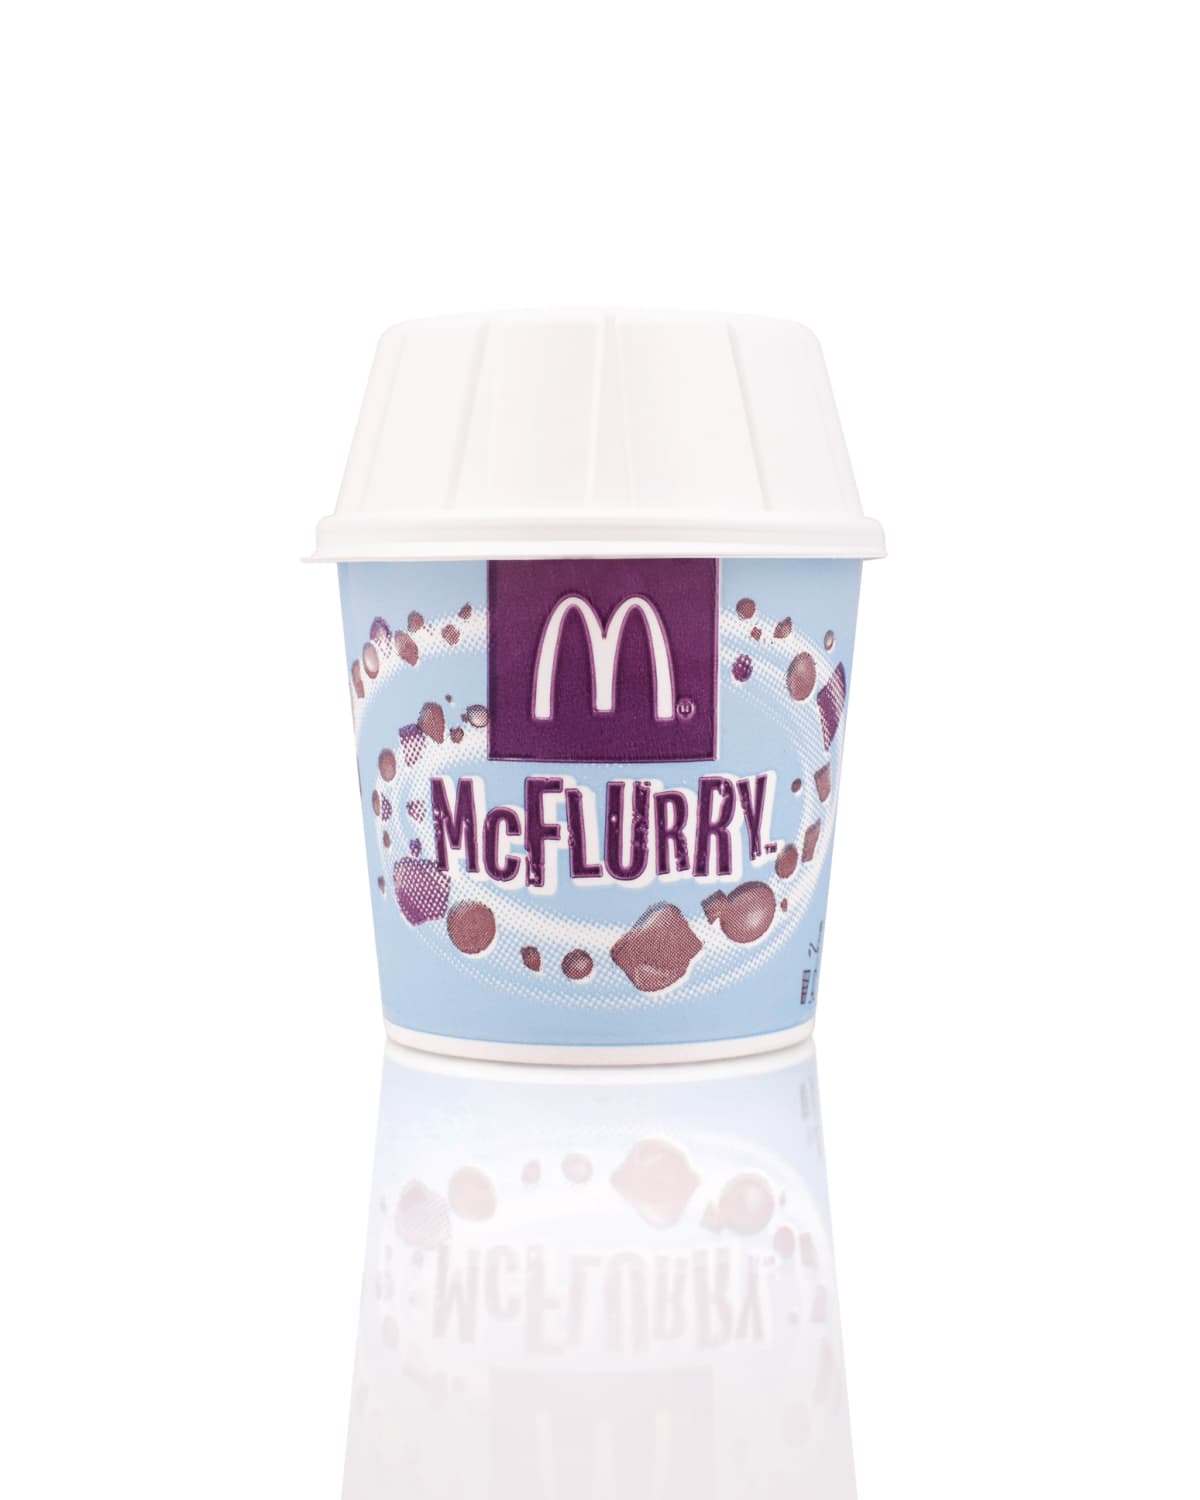 Belgrade, Serbia - November 5, 2014: McFlurry ice cream on white background. McFlurry ice cream is produced by McDonald's which is one of the World's largest fast food franchise.